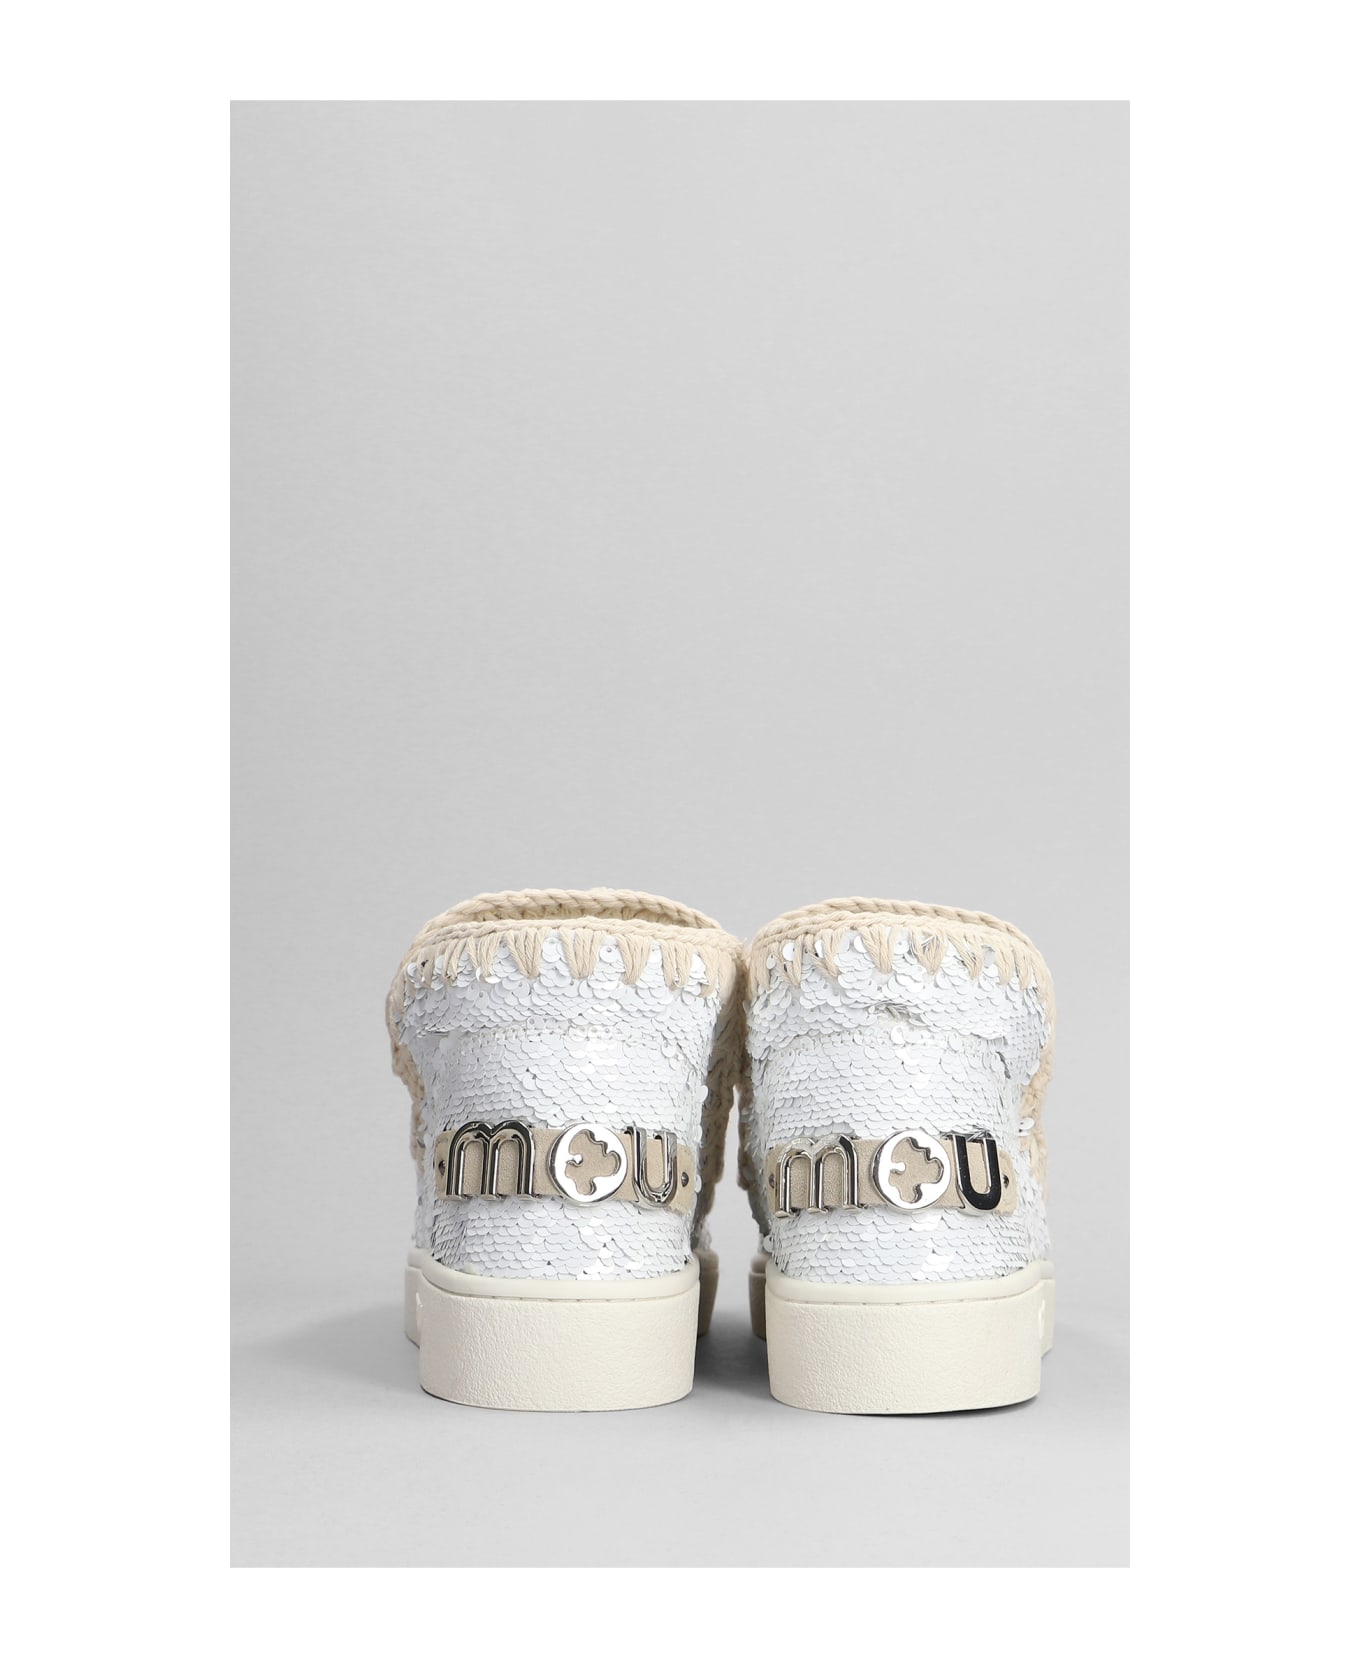 Mou Eskimo New Low Heels Ankle Boots In White Synthetic Fibers - white スニーカー